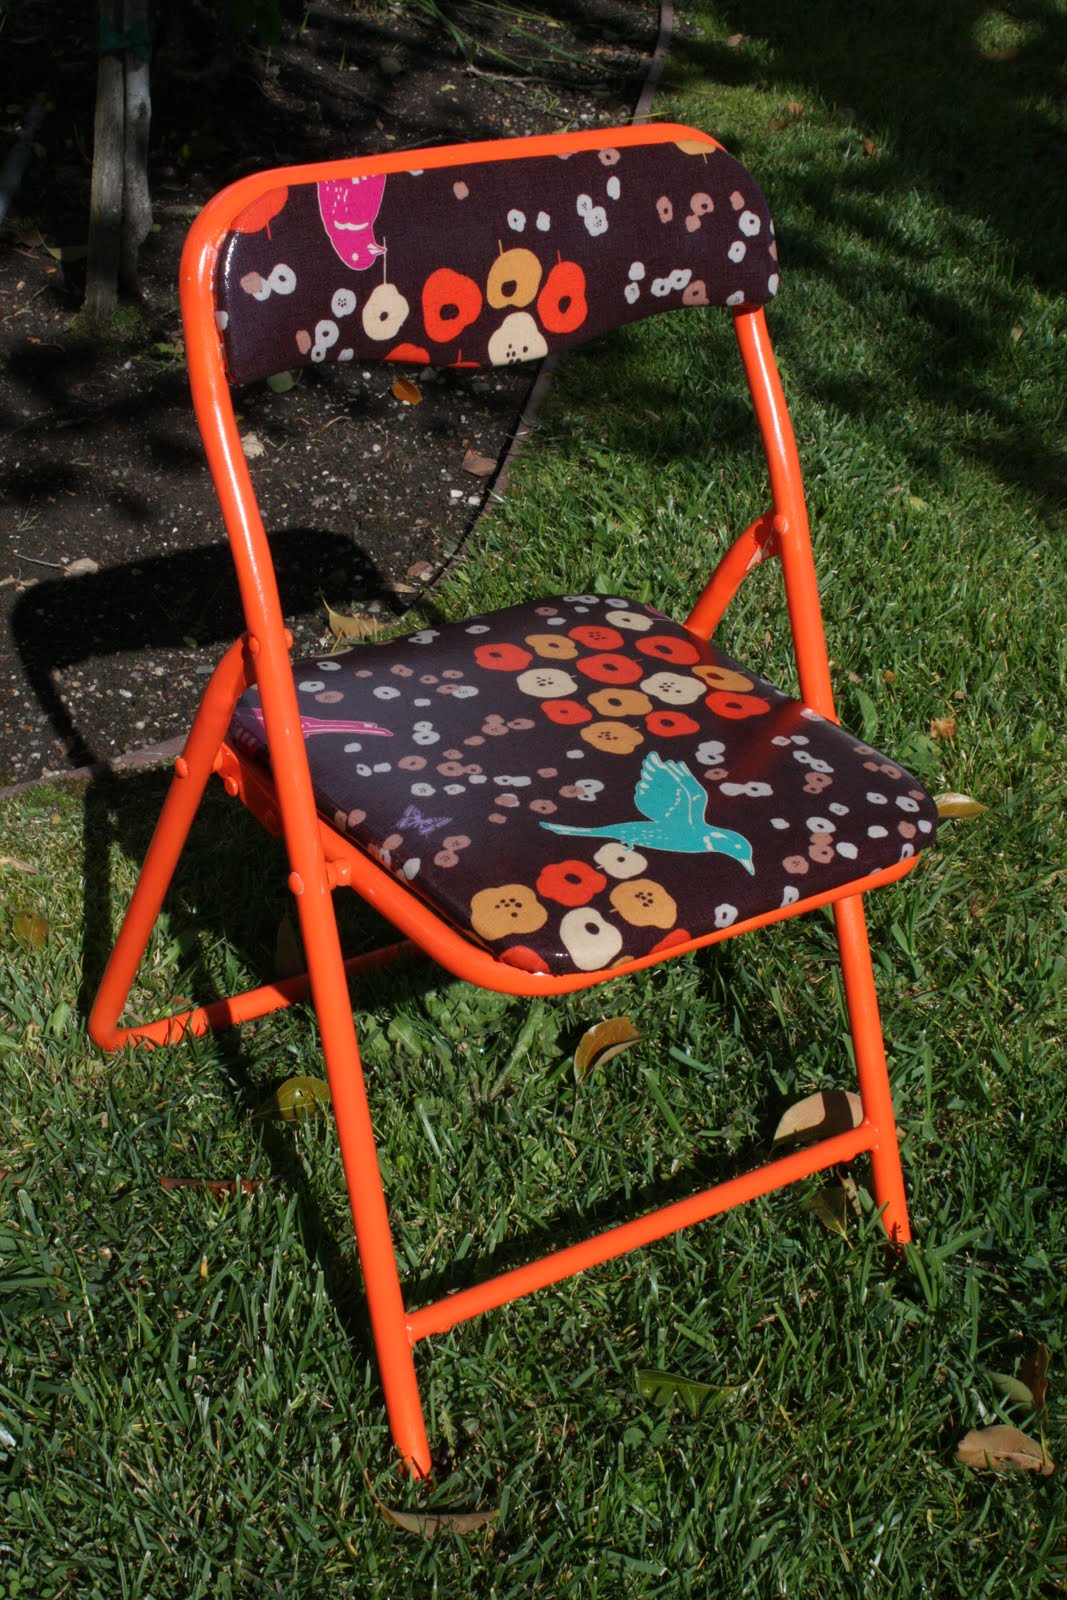 Floor Chairs, Lap Toppers, Loungers, and BackJacks Available at